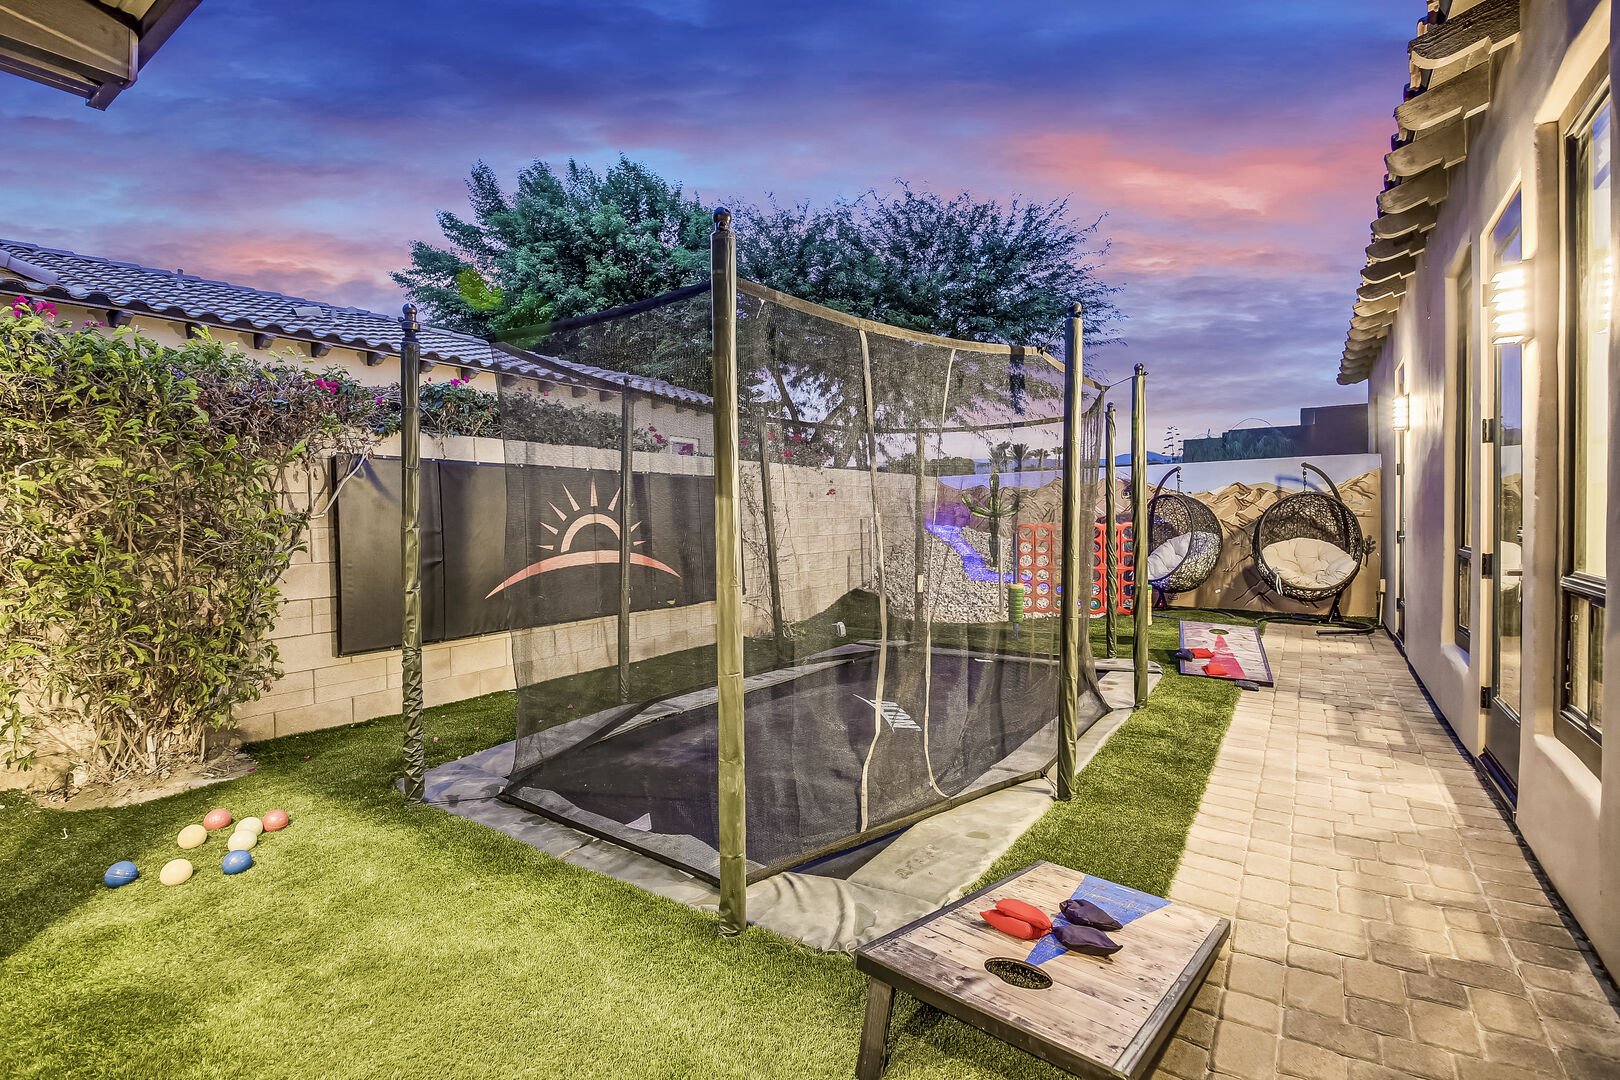 Enjoy more fun! Bocce ball, built-in trampoline, classic game of Bean Bag Toss, GIANT Connect 4, and seating for two on the modern hanging swing chairs.